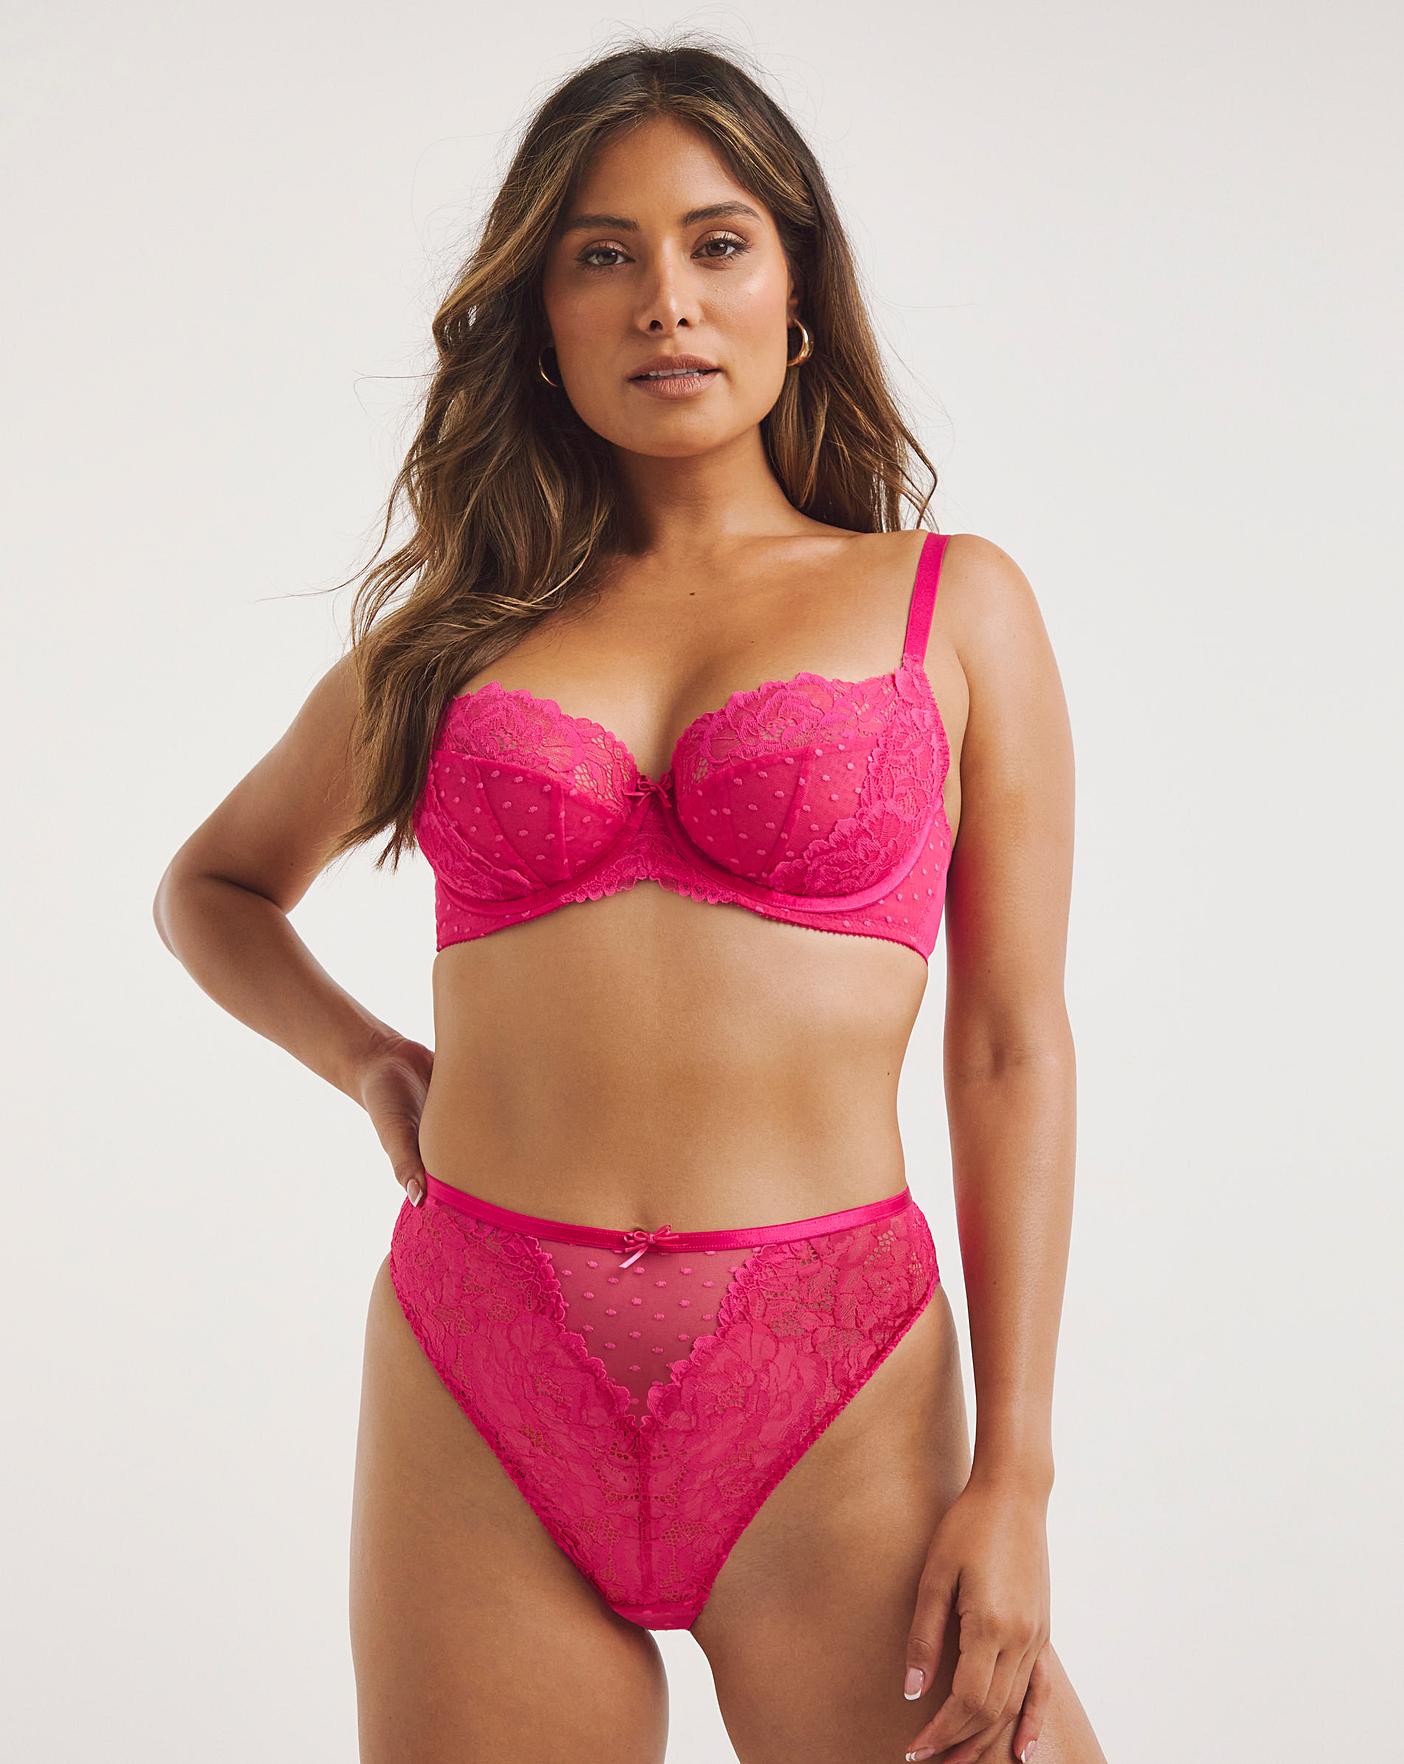 Ann Summers The Boldly Beautiful Longline Balcony India